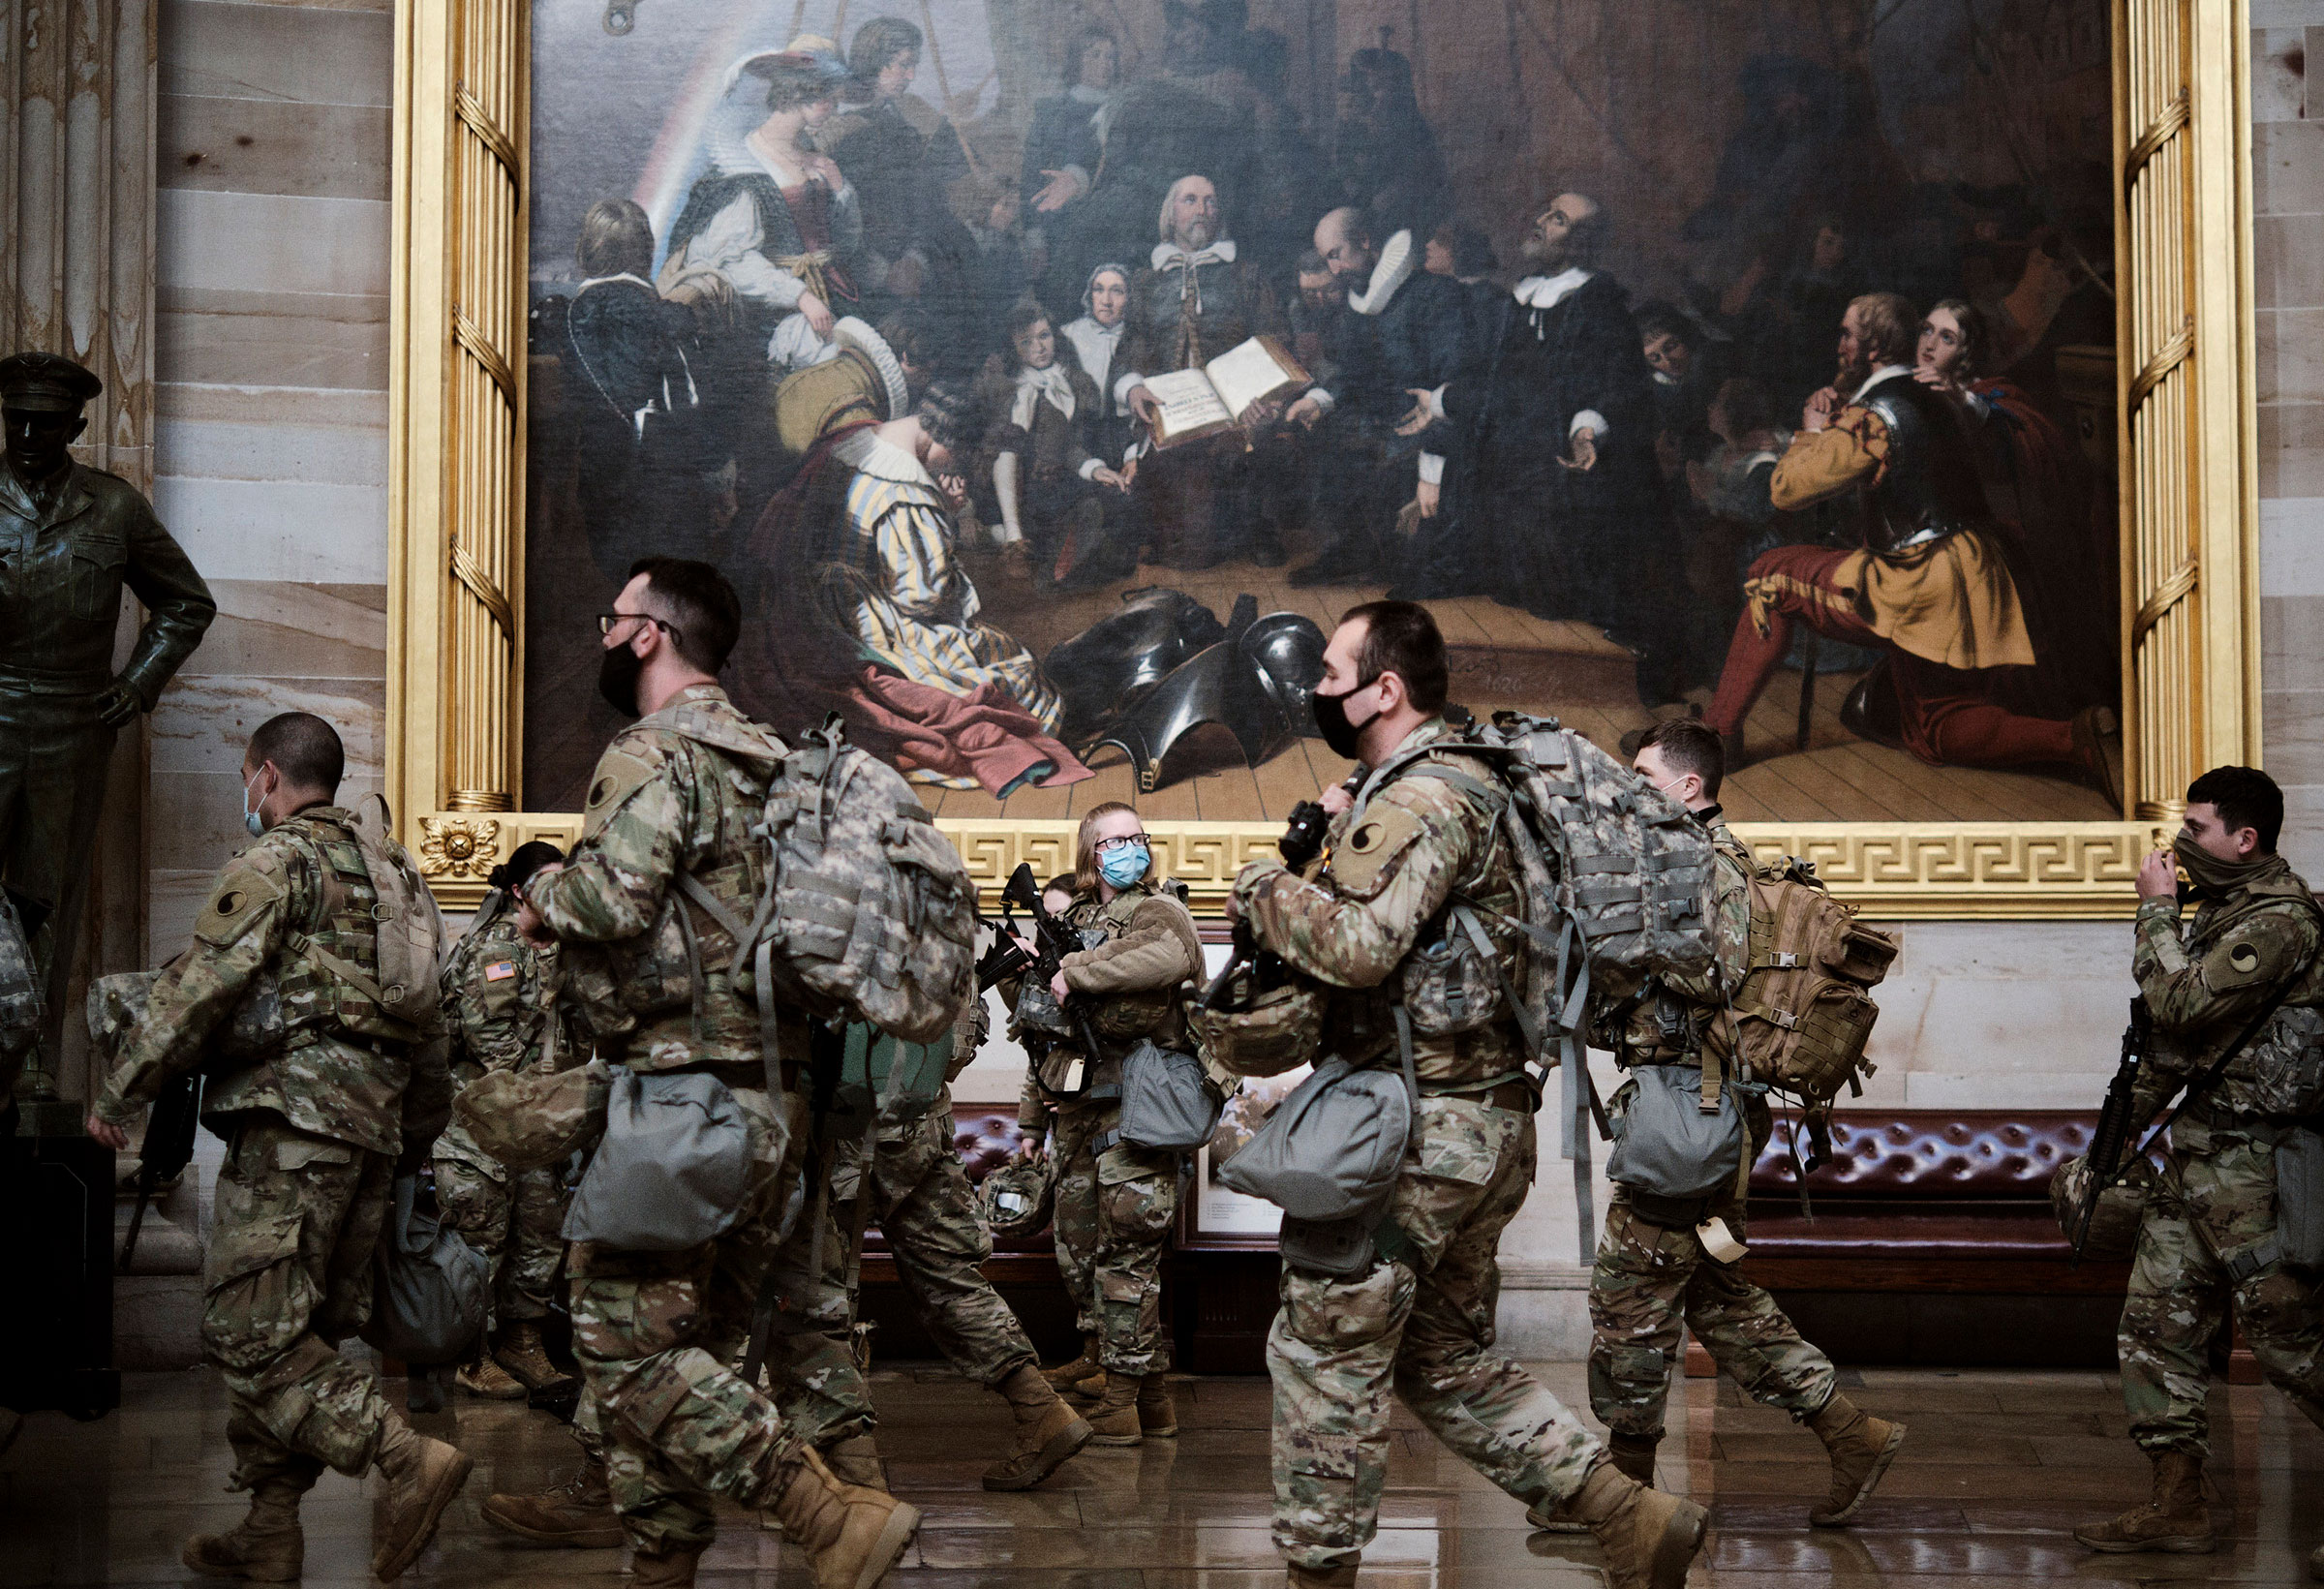 Armed National Guard troops gather in the rotunda of the Capitol in Washington on Wednesday, Jan. 13, 2021. (T.J. Kirkpatrick/The New York Times)